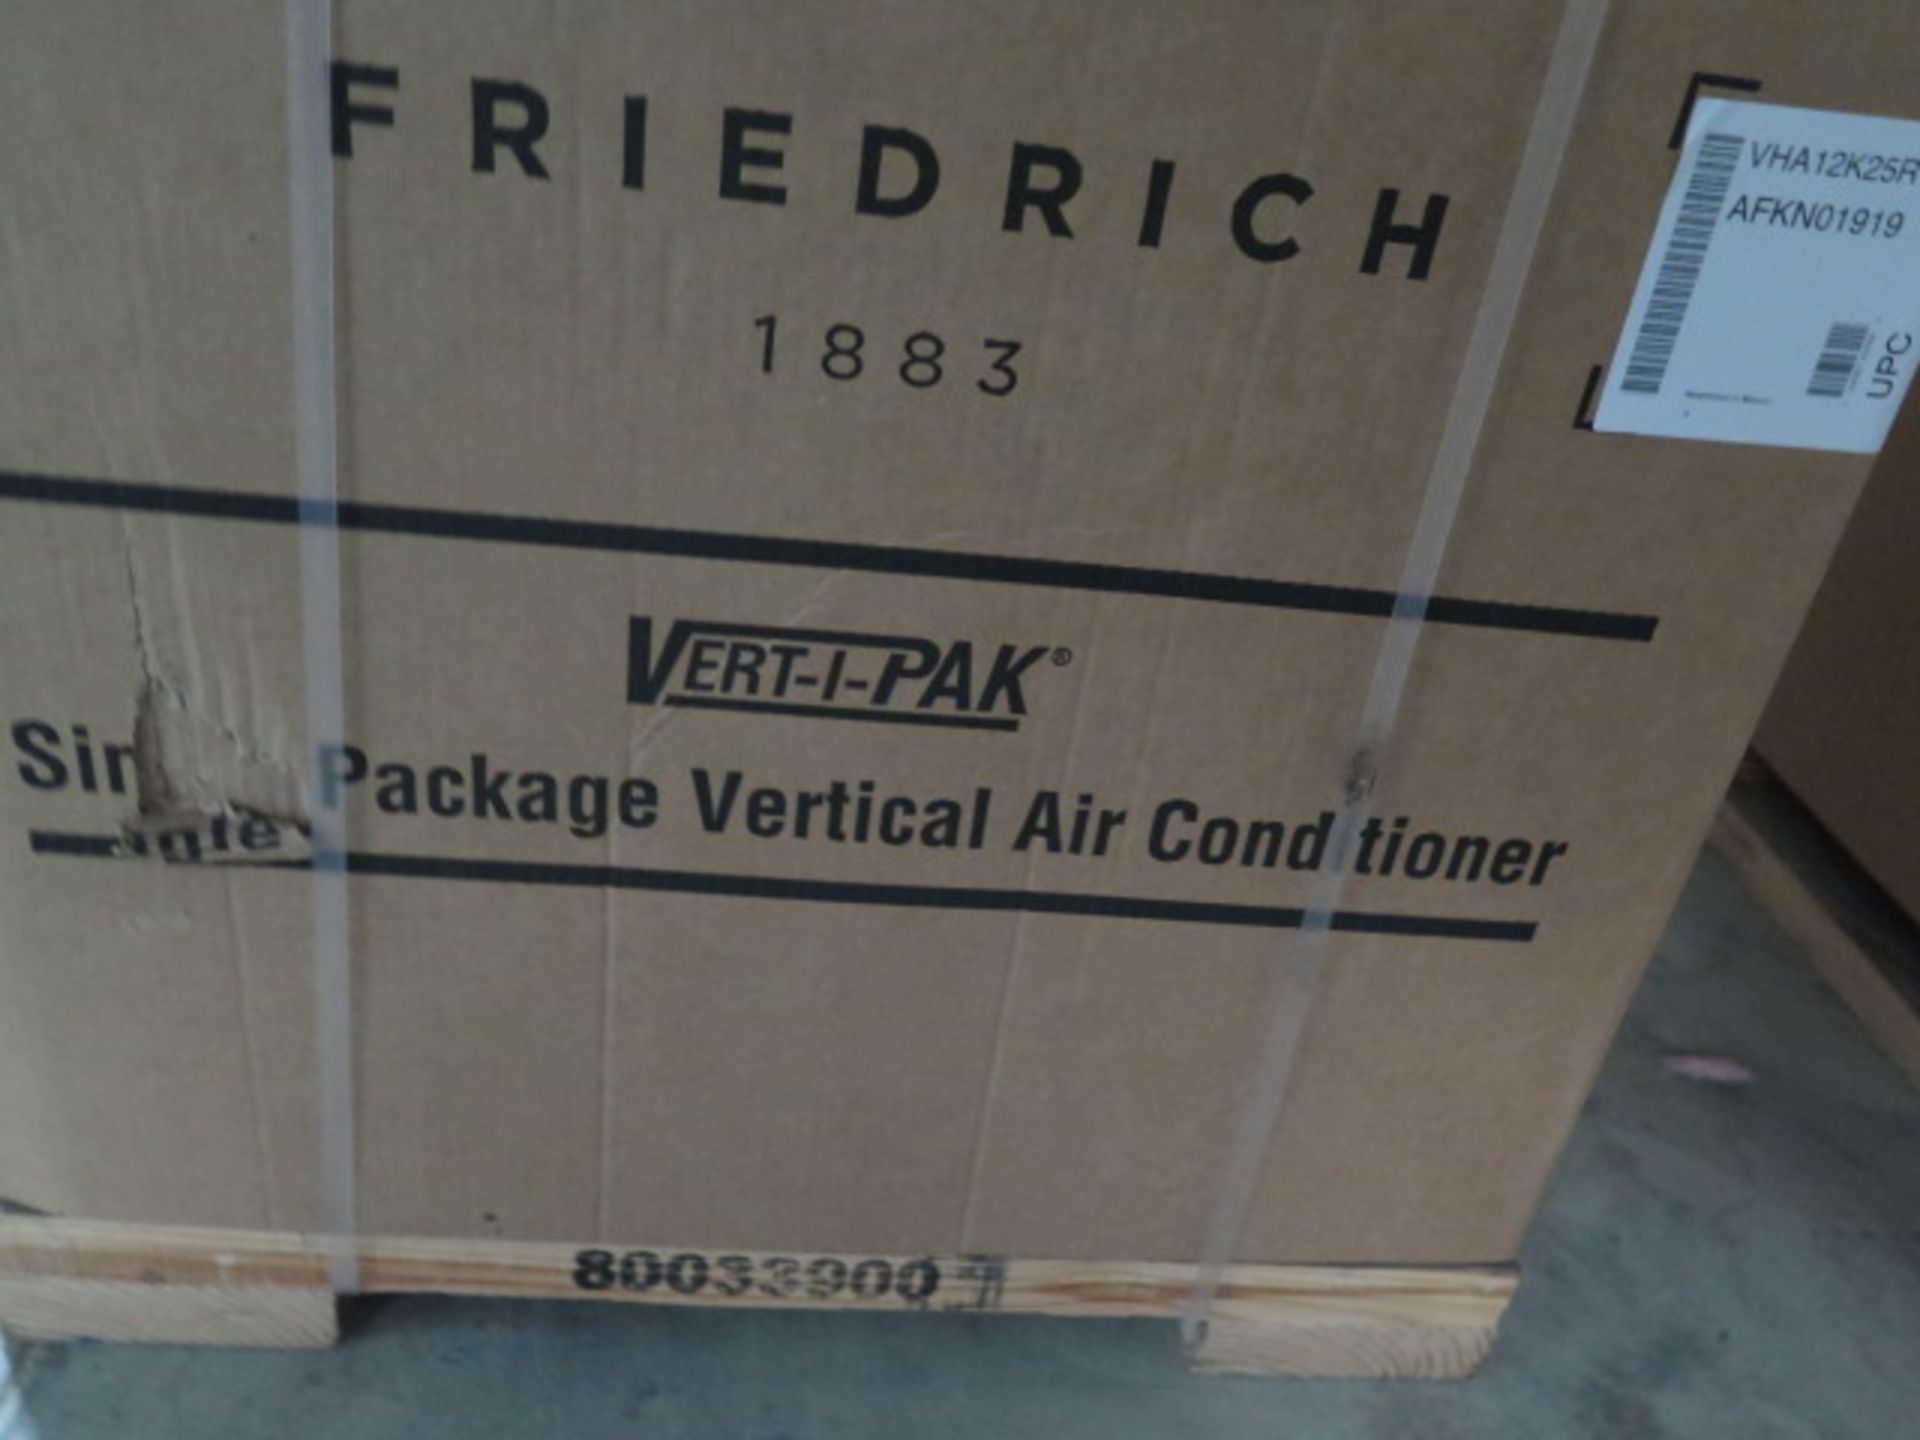 Friedrich VHA12K25RTN Hotel Style 1 Ton Single Package Vertical Air Conditioner s/n AFKN01919 w/ 9, - Image 3 of 4